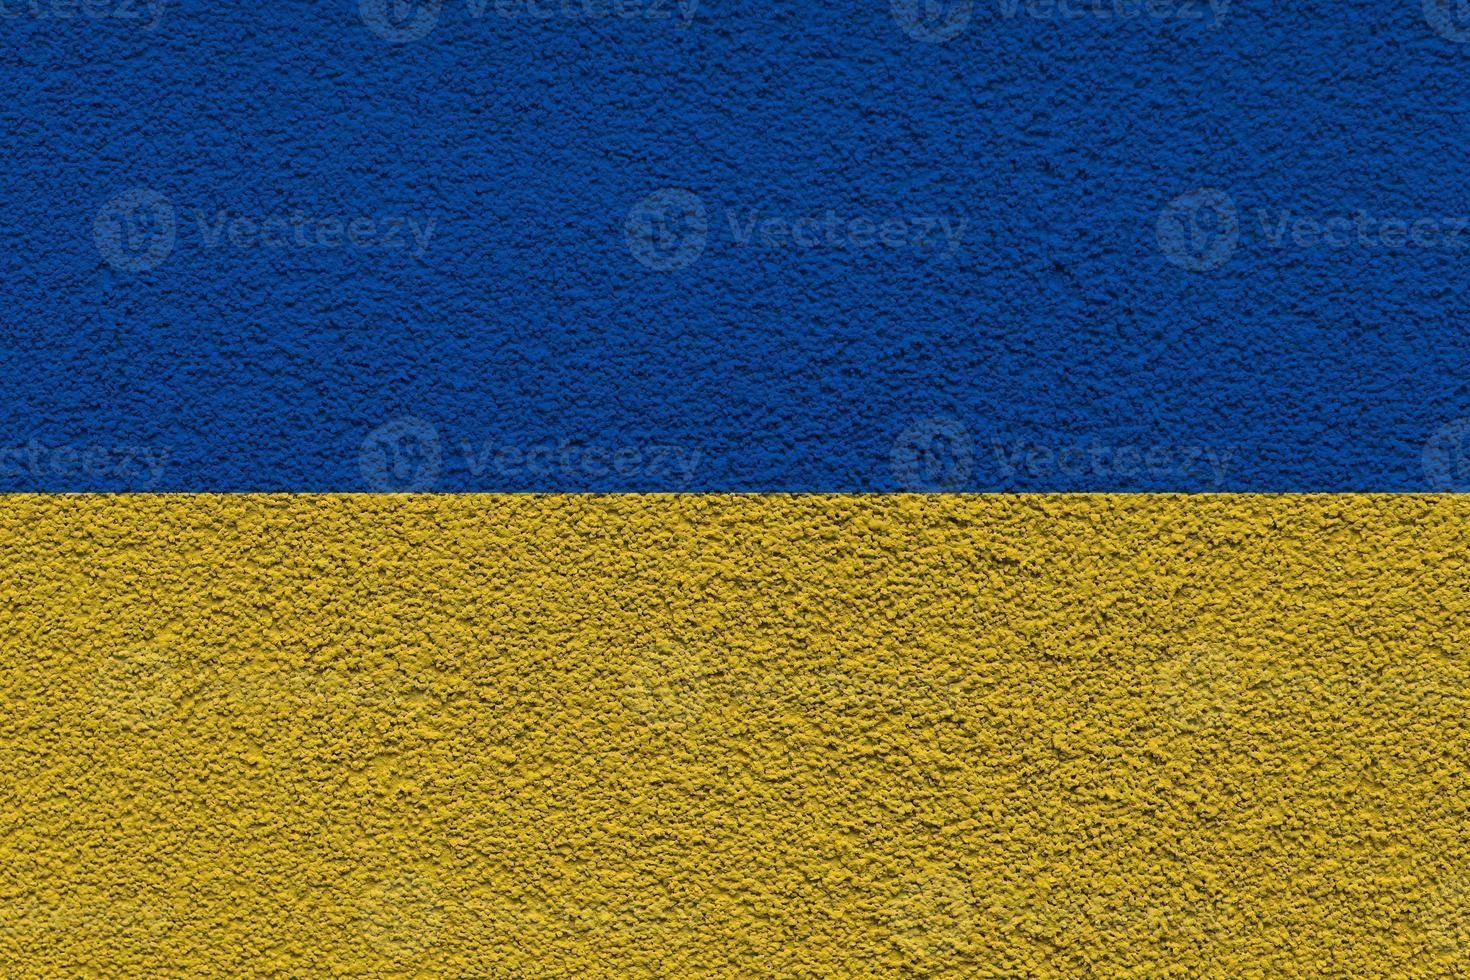 Ukrainian state national flag. Texture concrete grunge wall in yellow-blue color. State symbol of Ukraine and Ukrainians. Ukrainian flag on a concrete wall background. photo